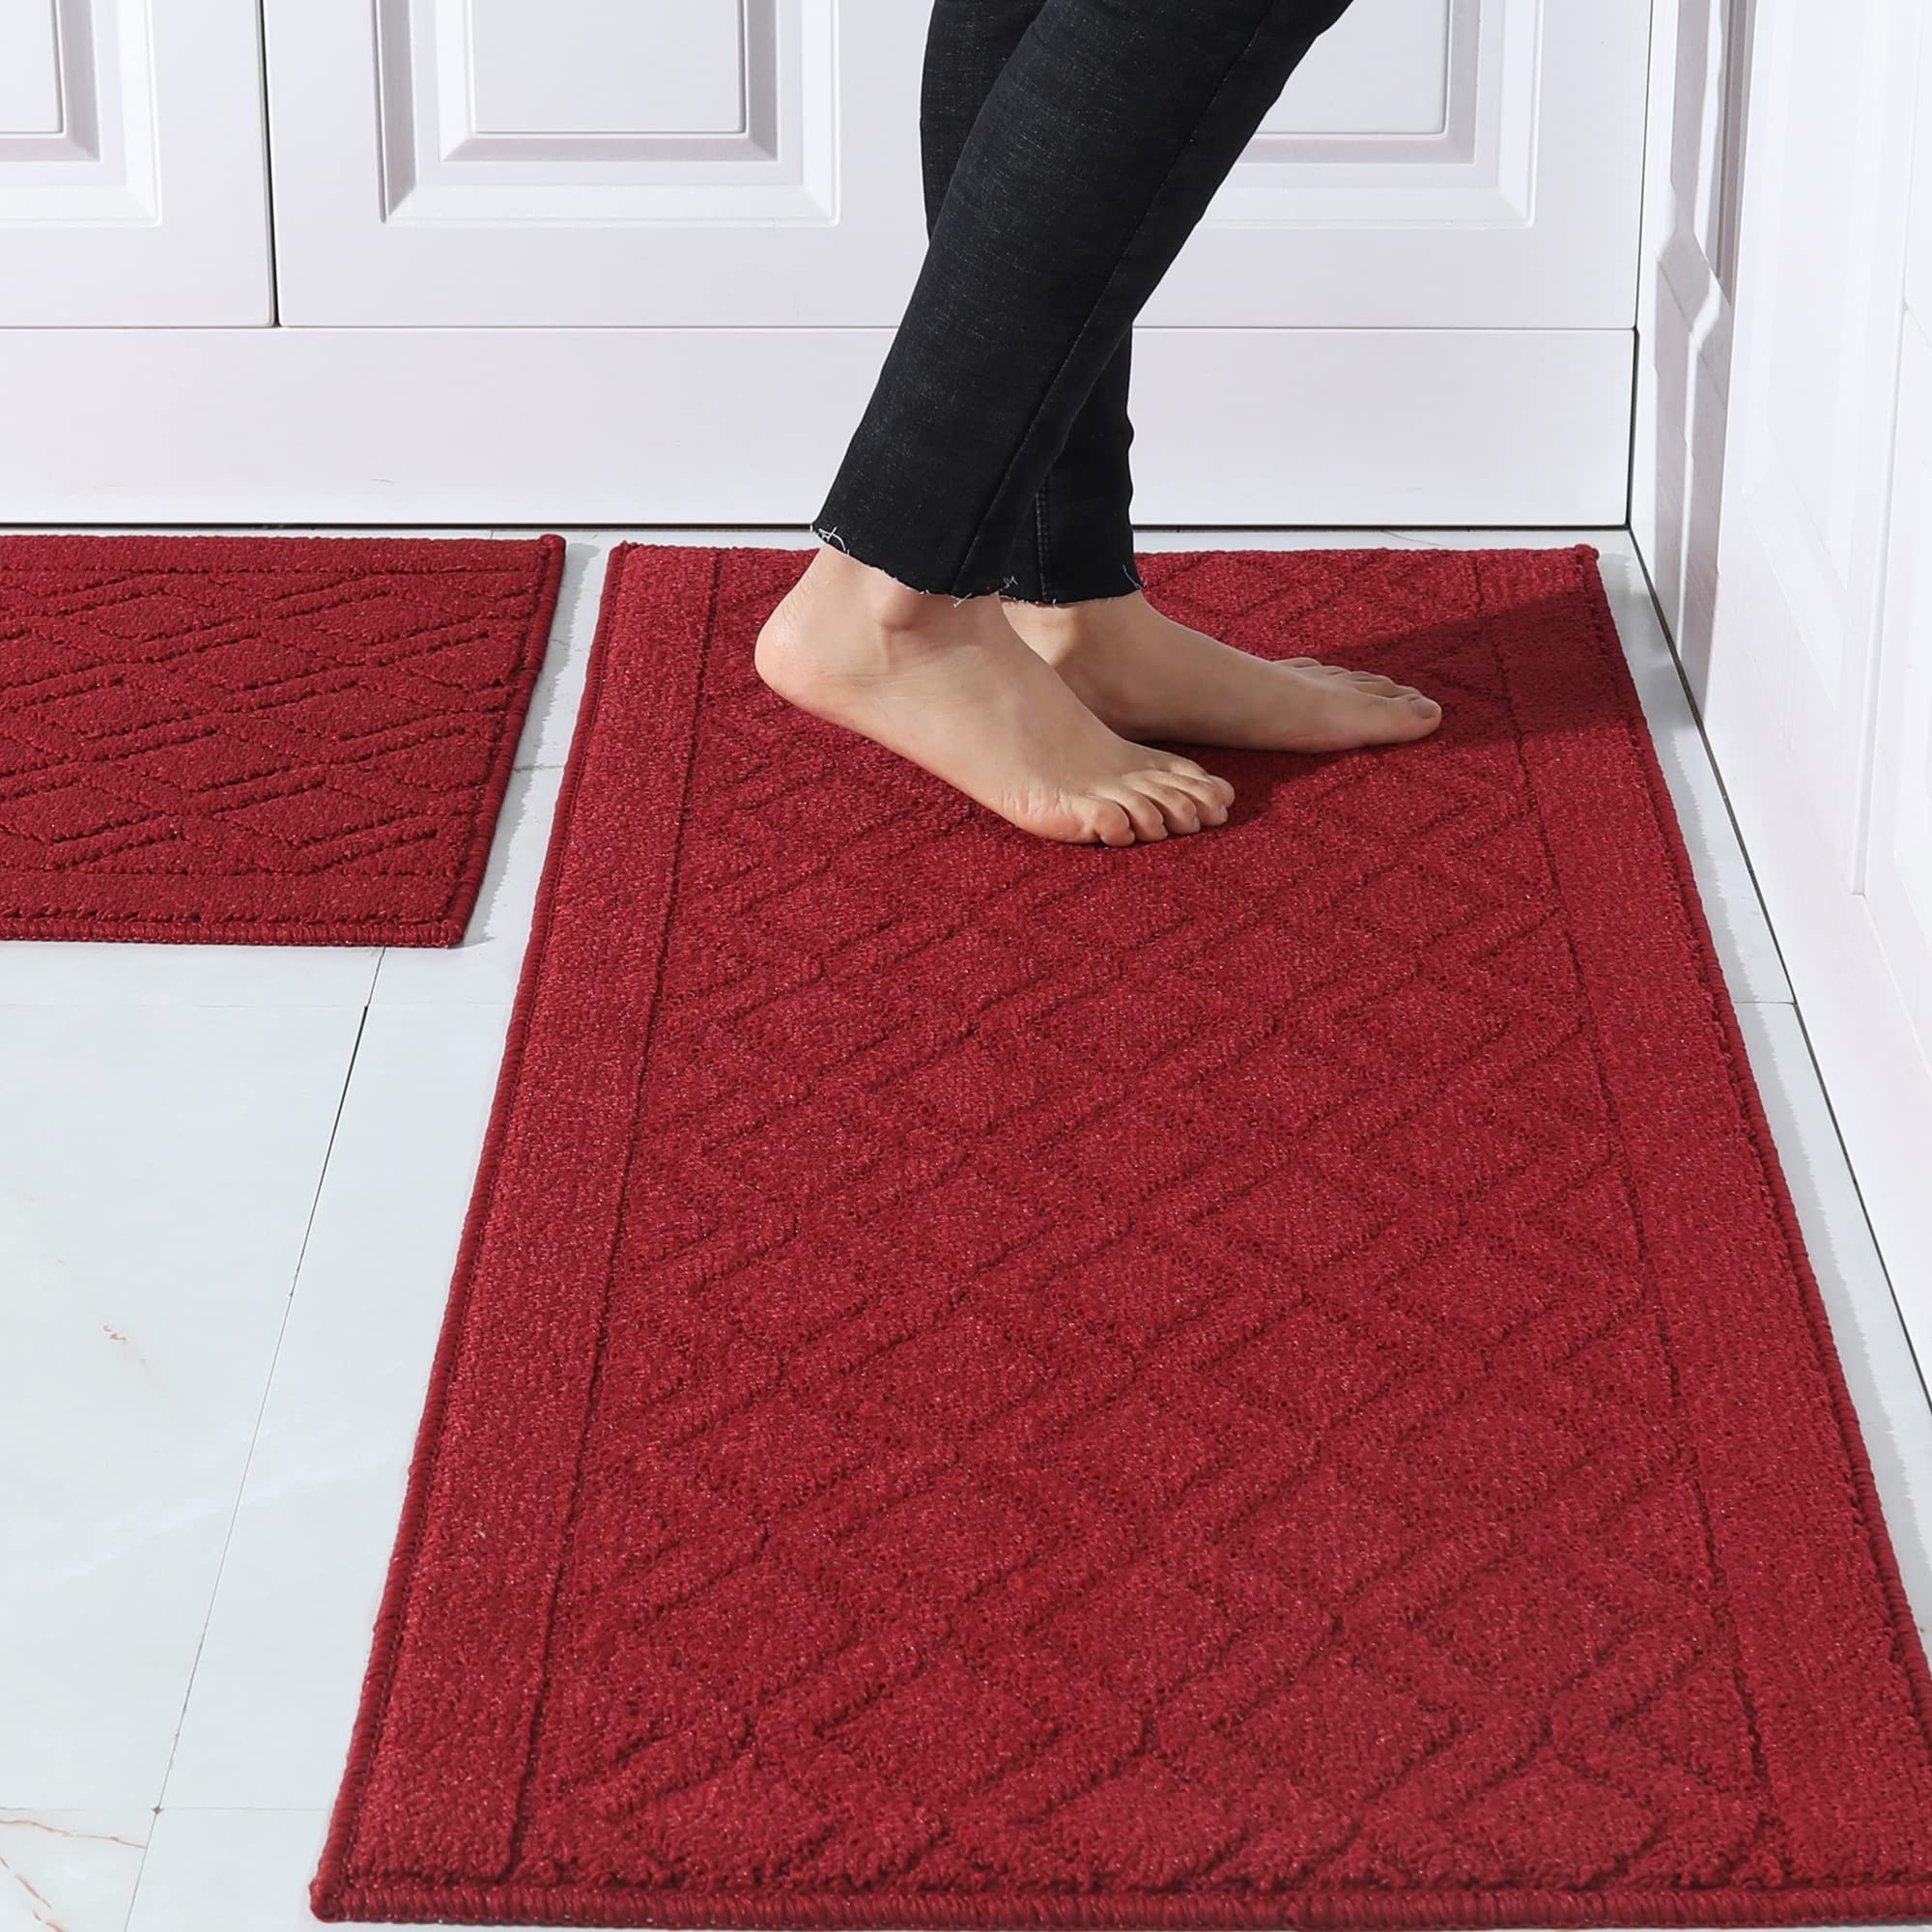 48x20 Inch/30X20 Inch Kitchen Rug Mats Made of 100% Polypropylene 2 Pieces Soft Kitchen Mat Specialized in Anti Slippery and Machine Washable,red